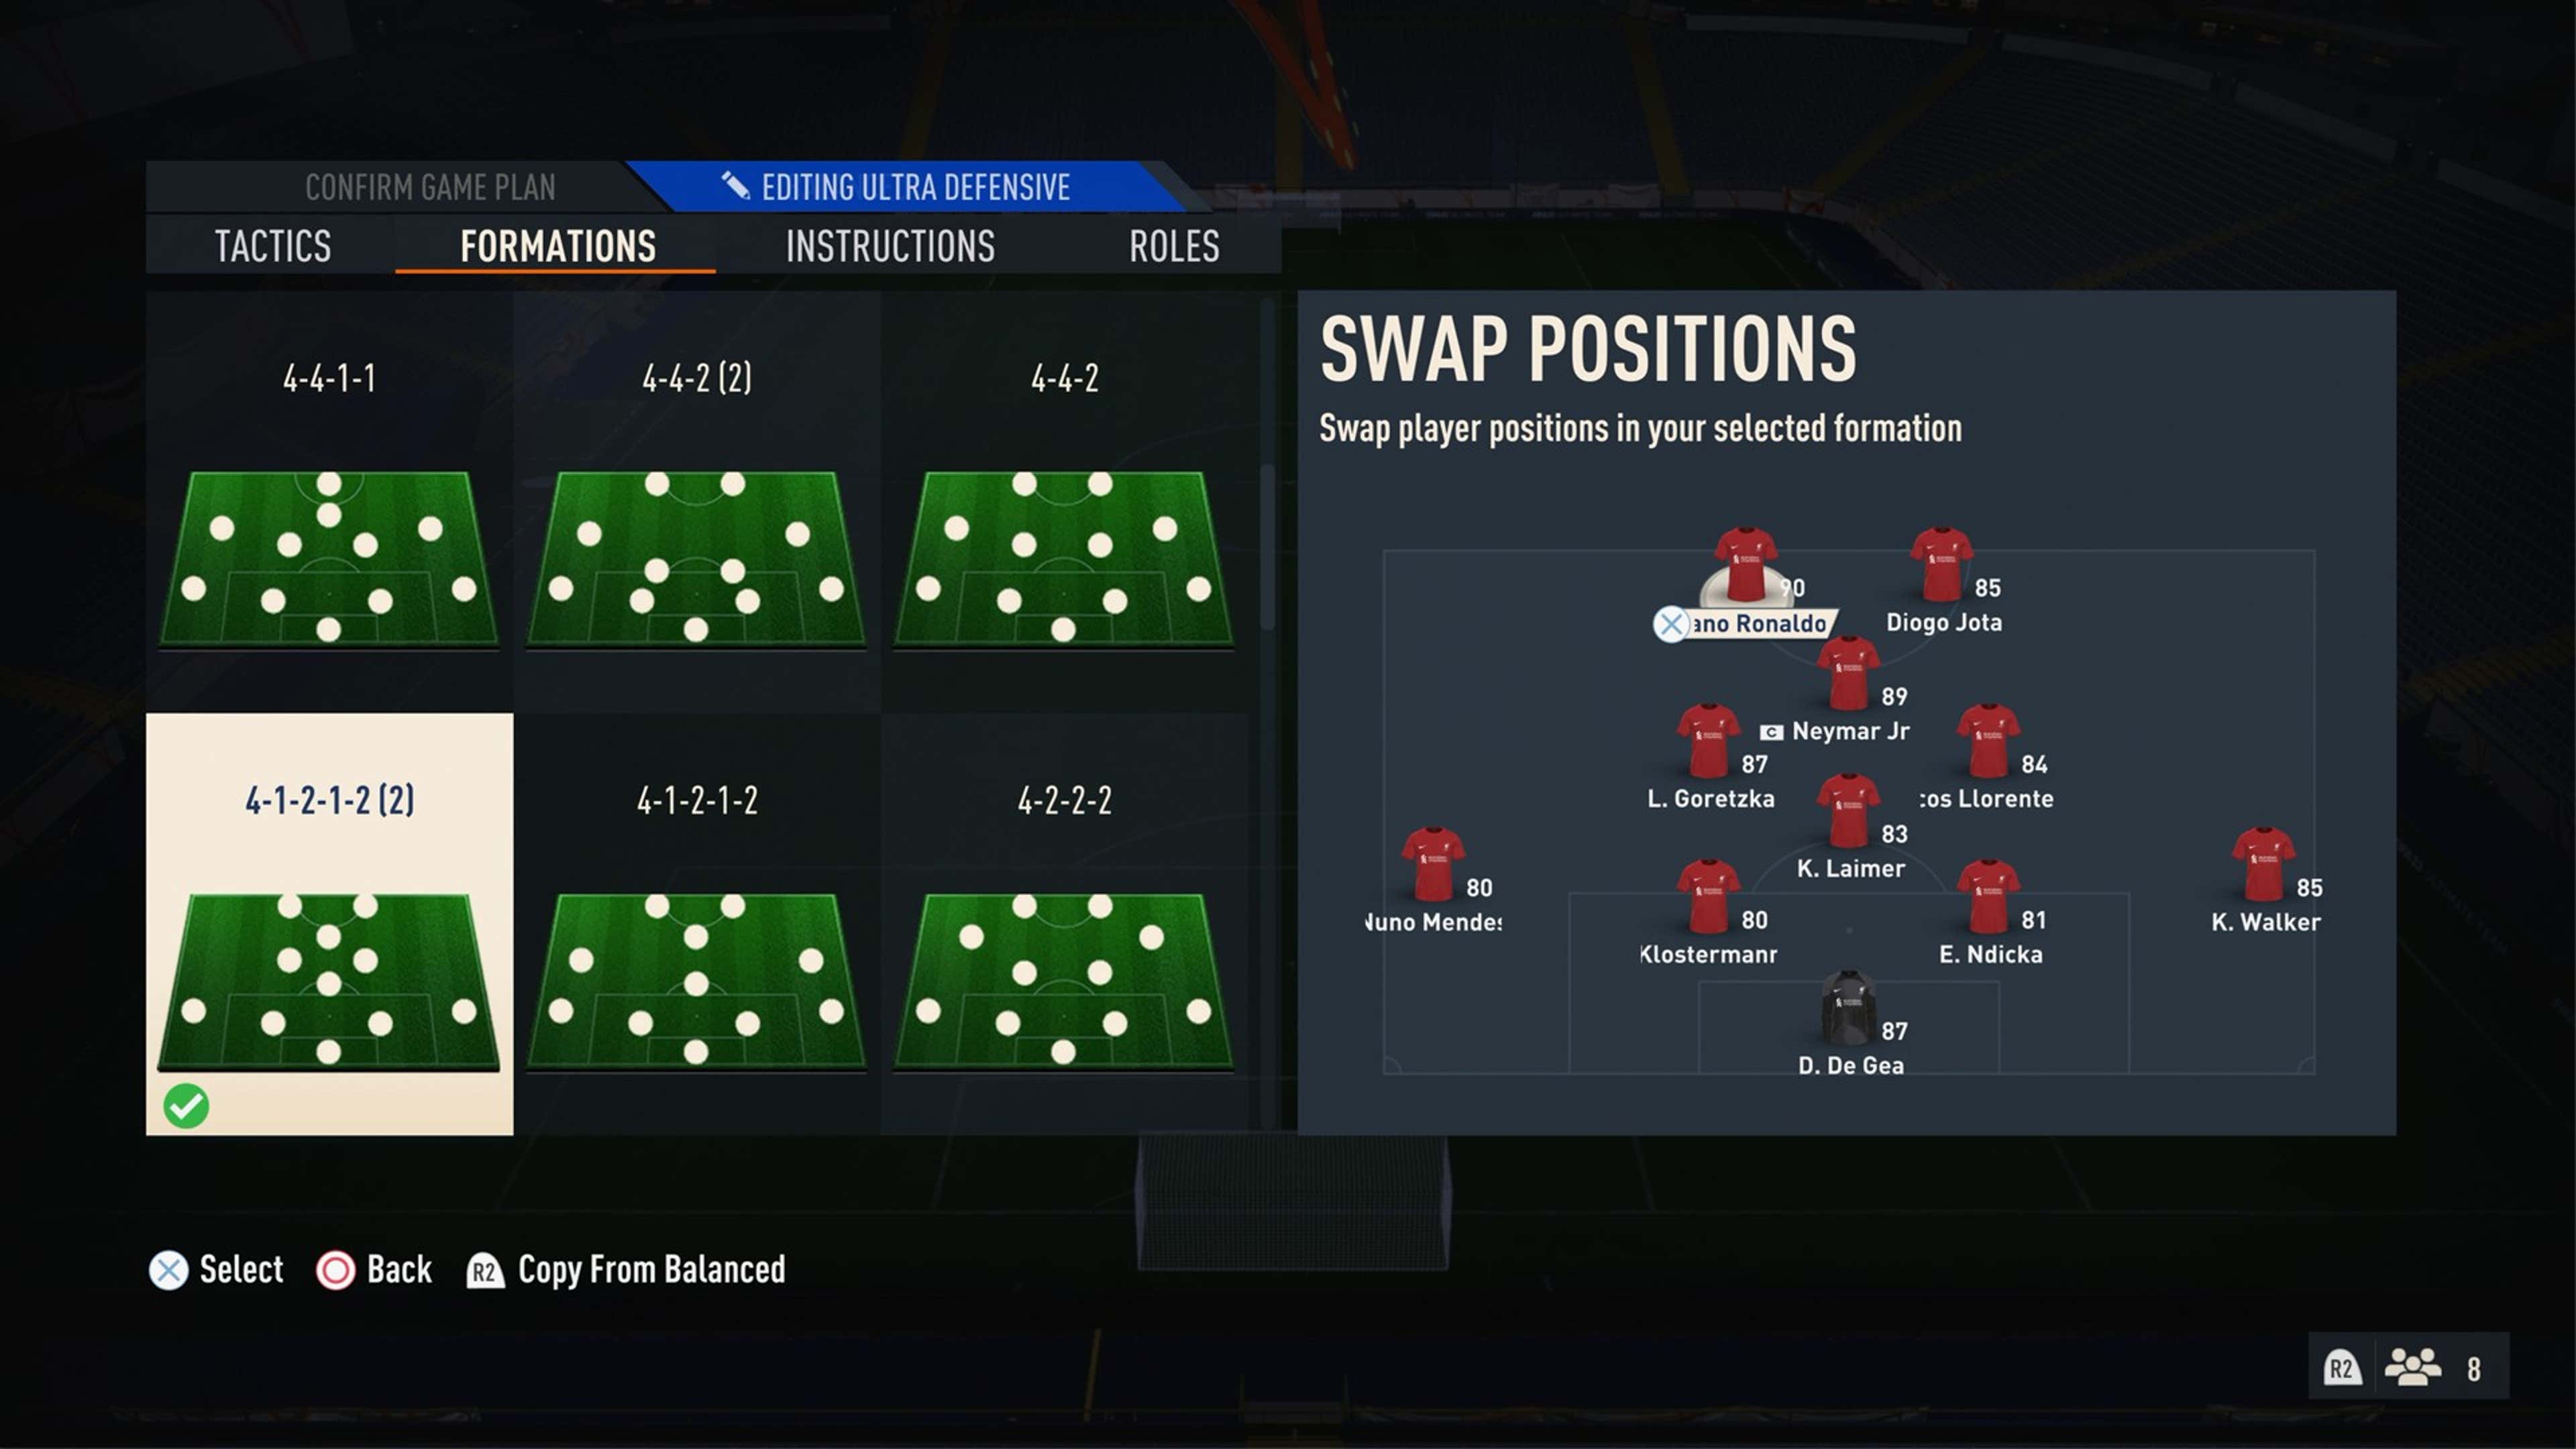 FIFA 23: 4-4-2 Formation Guide